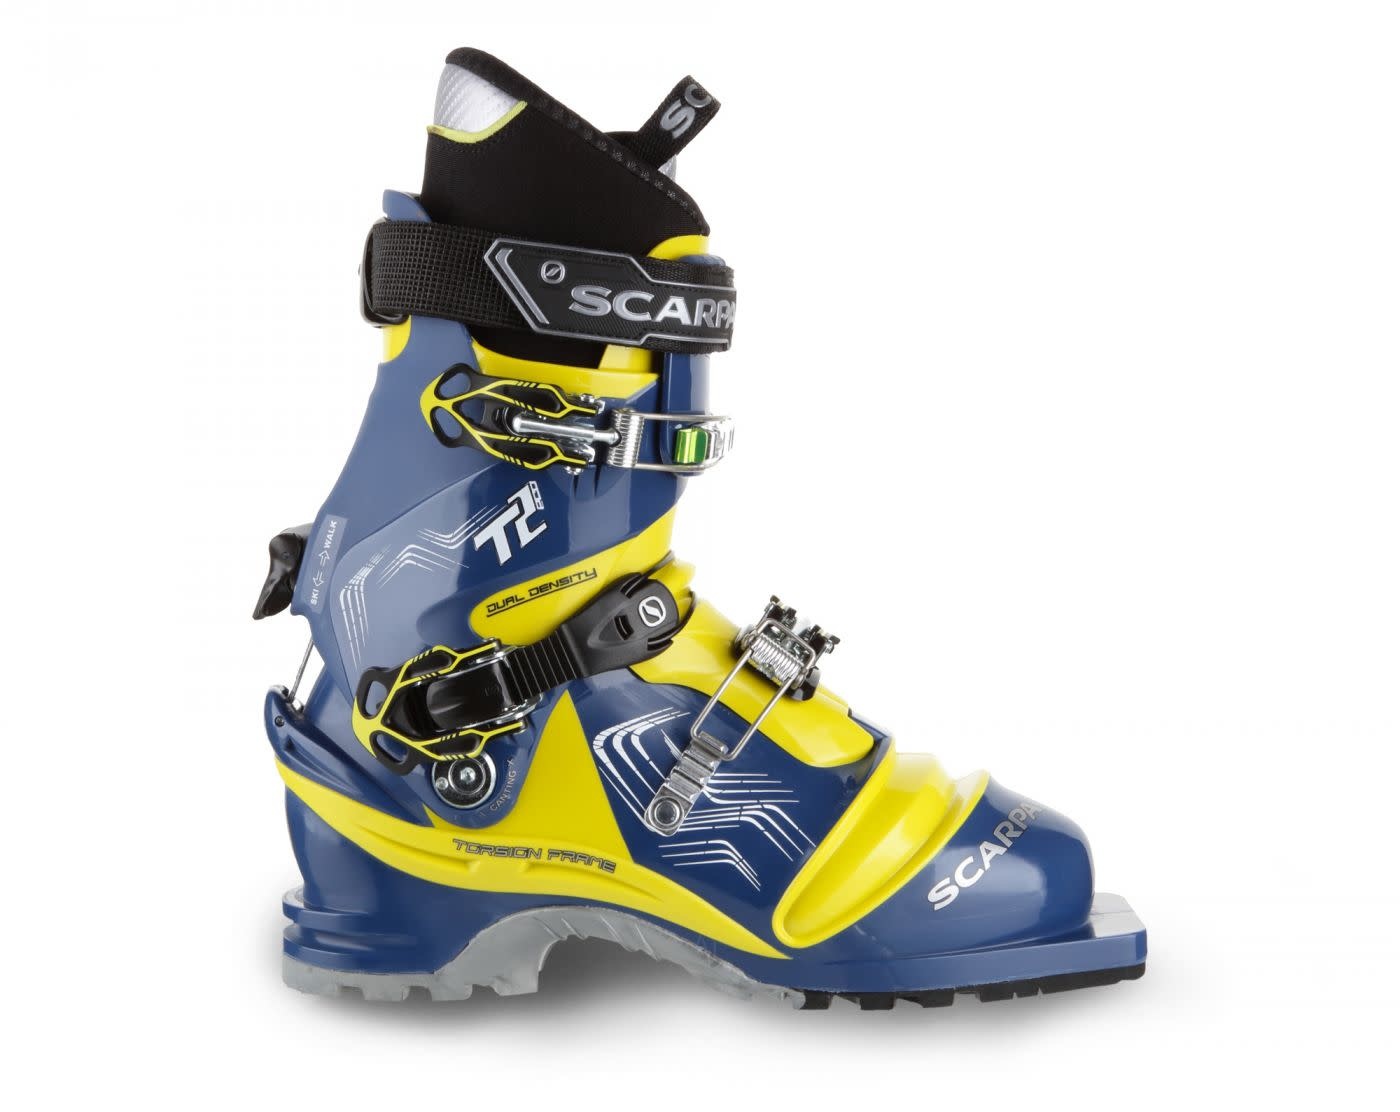 Scarpa T2 Eco Telemark Ski Boots - The BackCountry